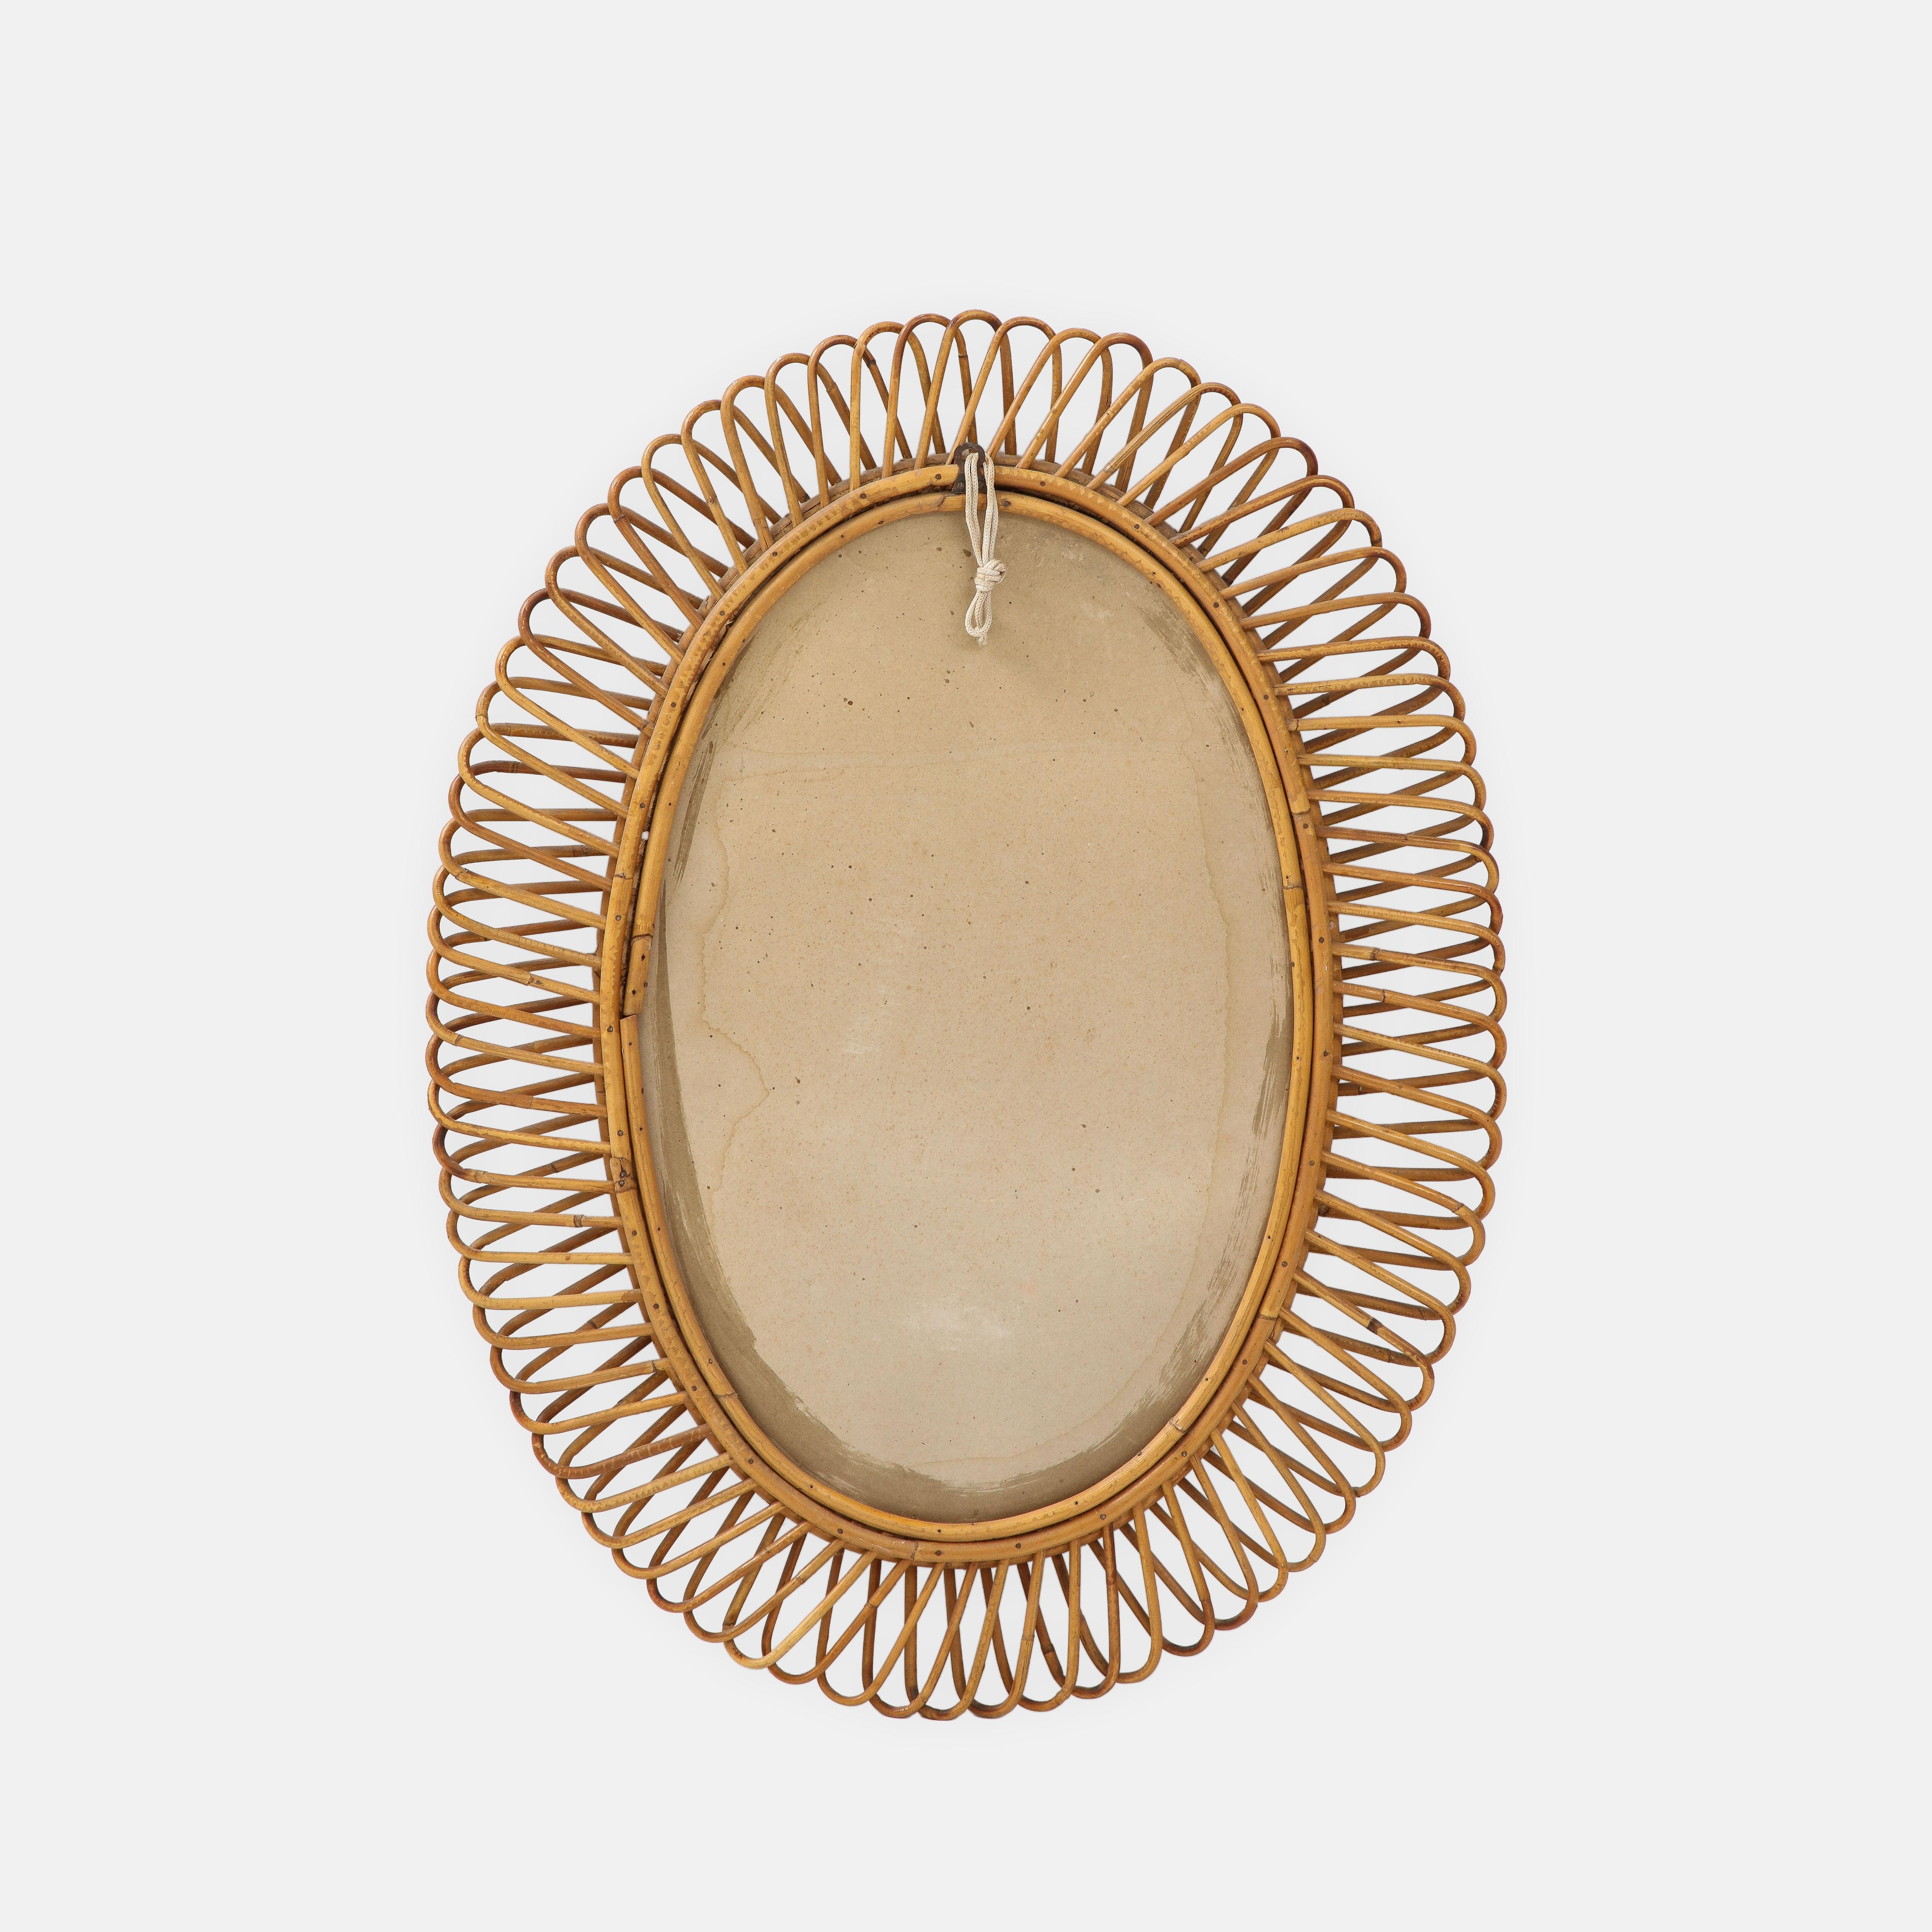 Bonacina Oval Bamboo and Rattan Mirror, Italy, 1950s For Sale 2